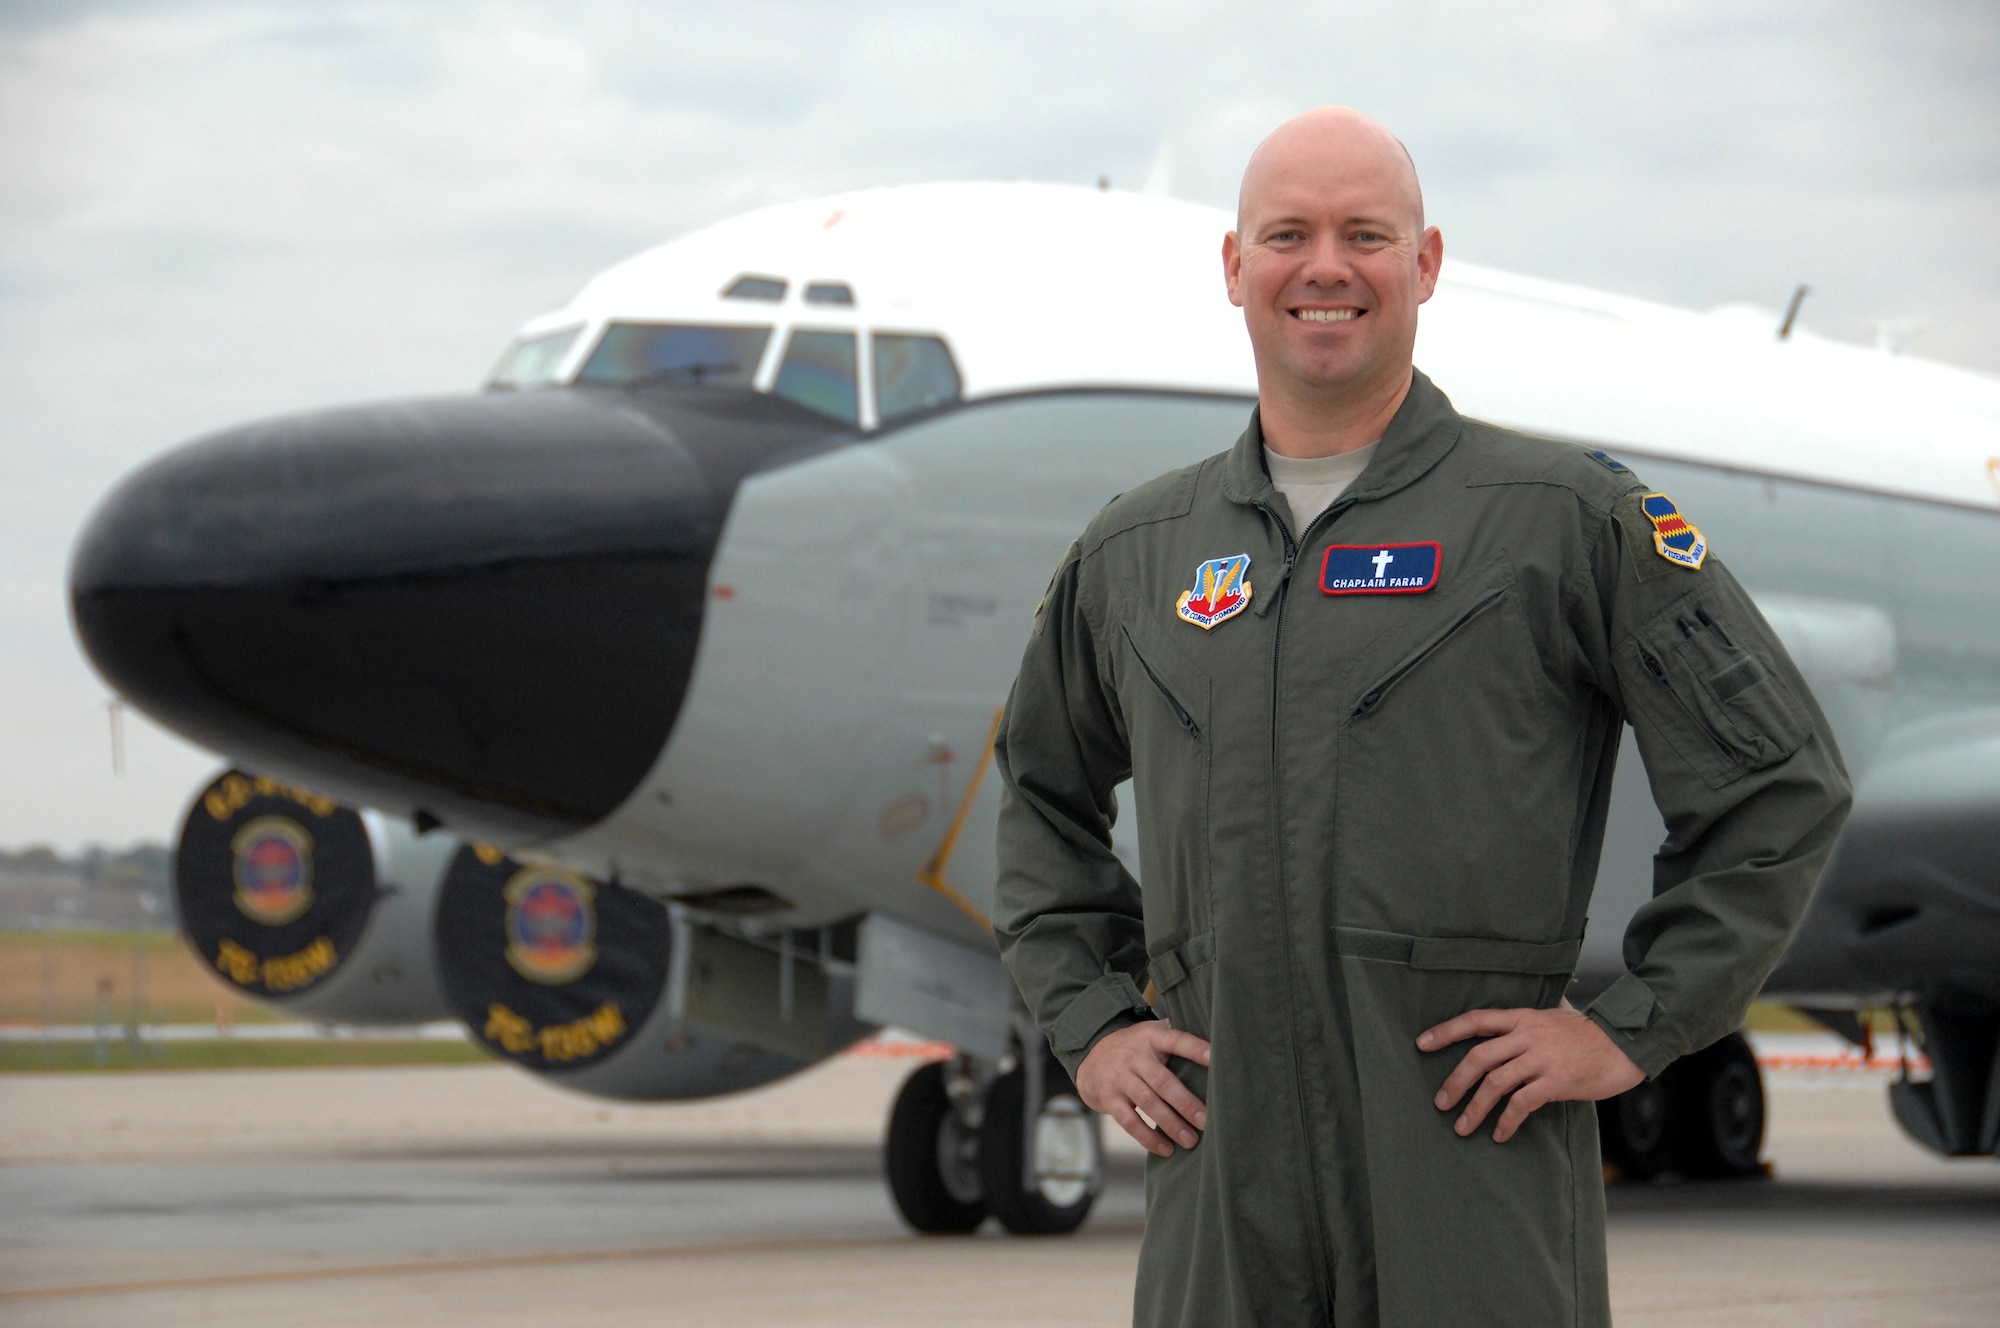 Chaplain (Capt.) Michael Farar poses in front of an RC-135 Rivet Joint aircraft at Offutt Air Force Base, Neb., Oct. 7, 2015. Farar is believed to be the first aerial-qualified chaplain to fly on operational missions with the 55th Wing and is also believed to be the first chaplain on aeronautical orders within Air Combat Command. (U.S. Air Force photo/Delanie Stafford)